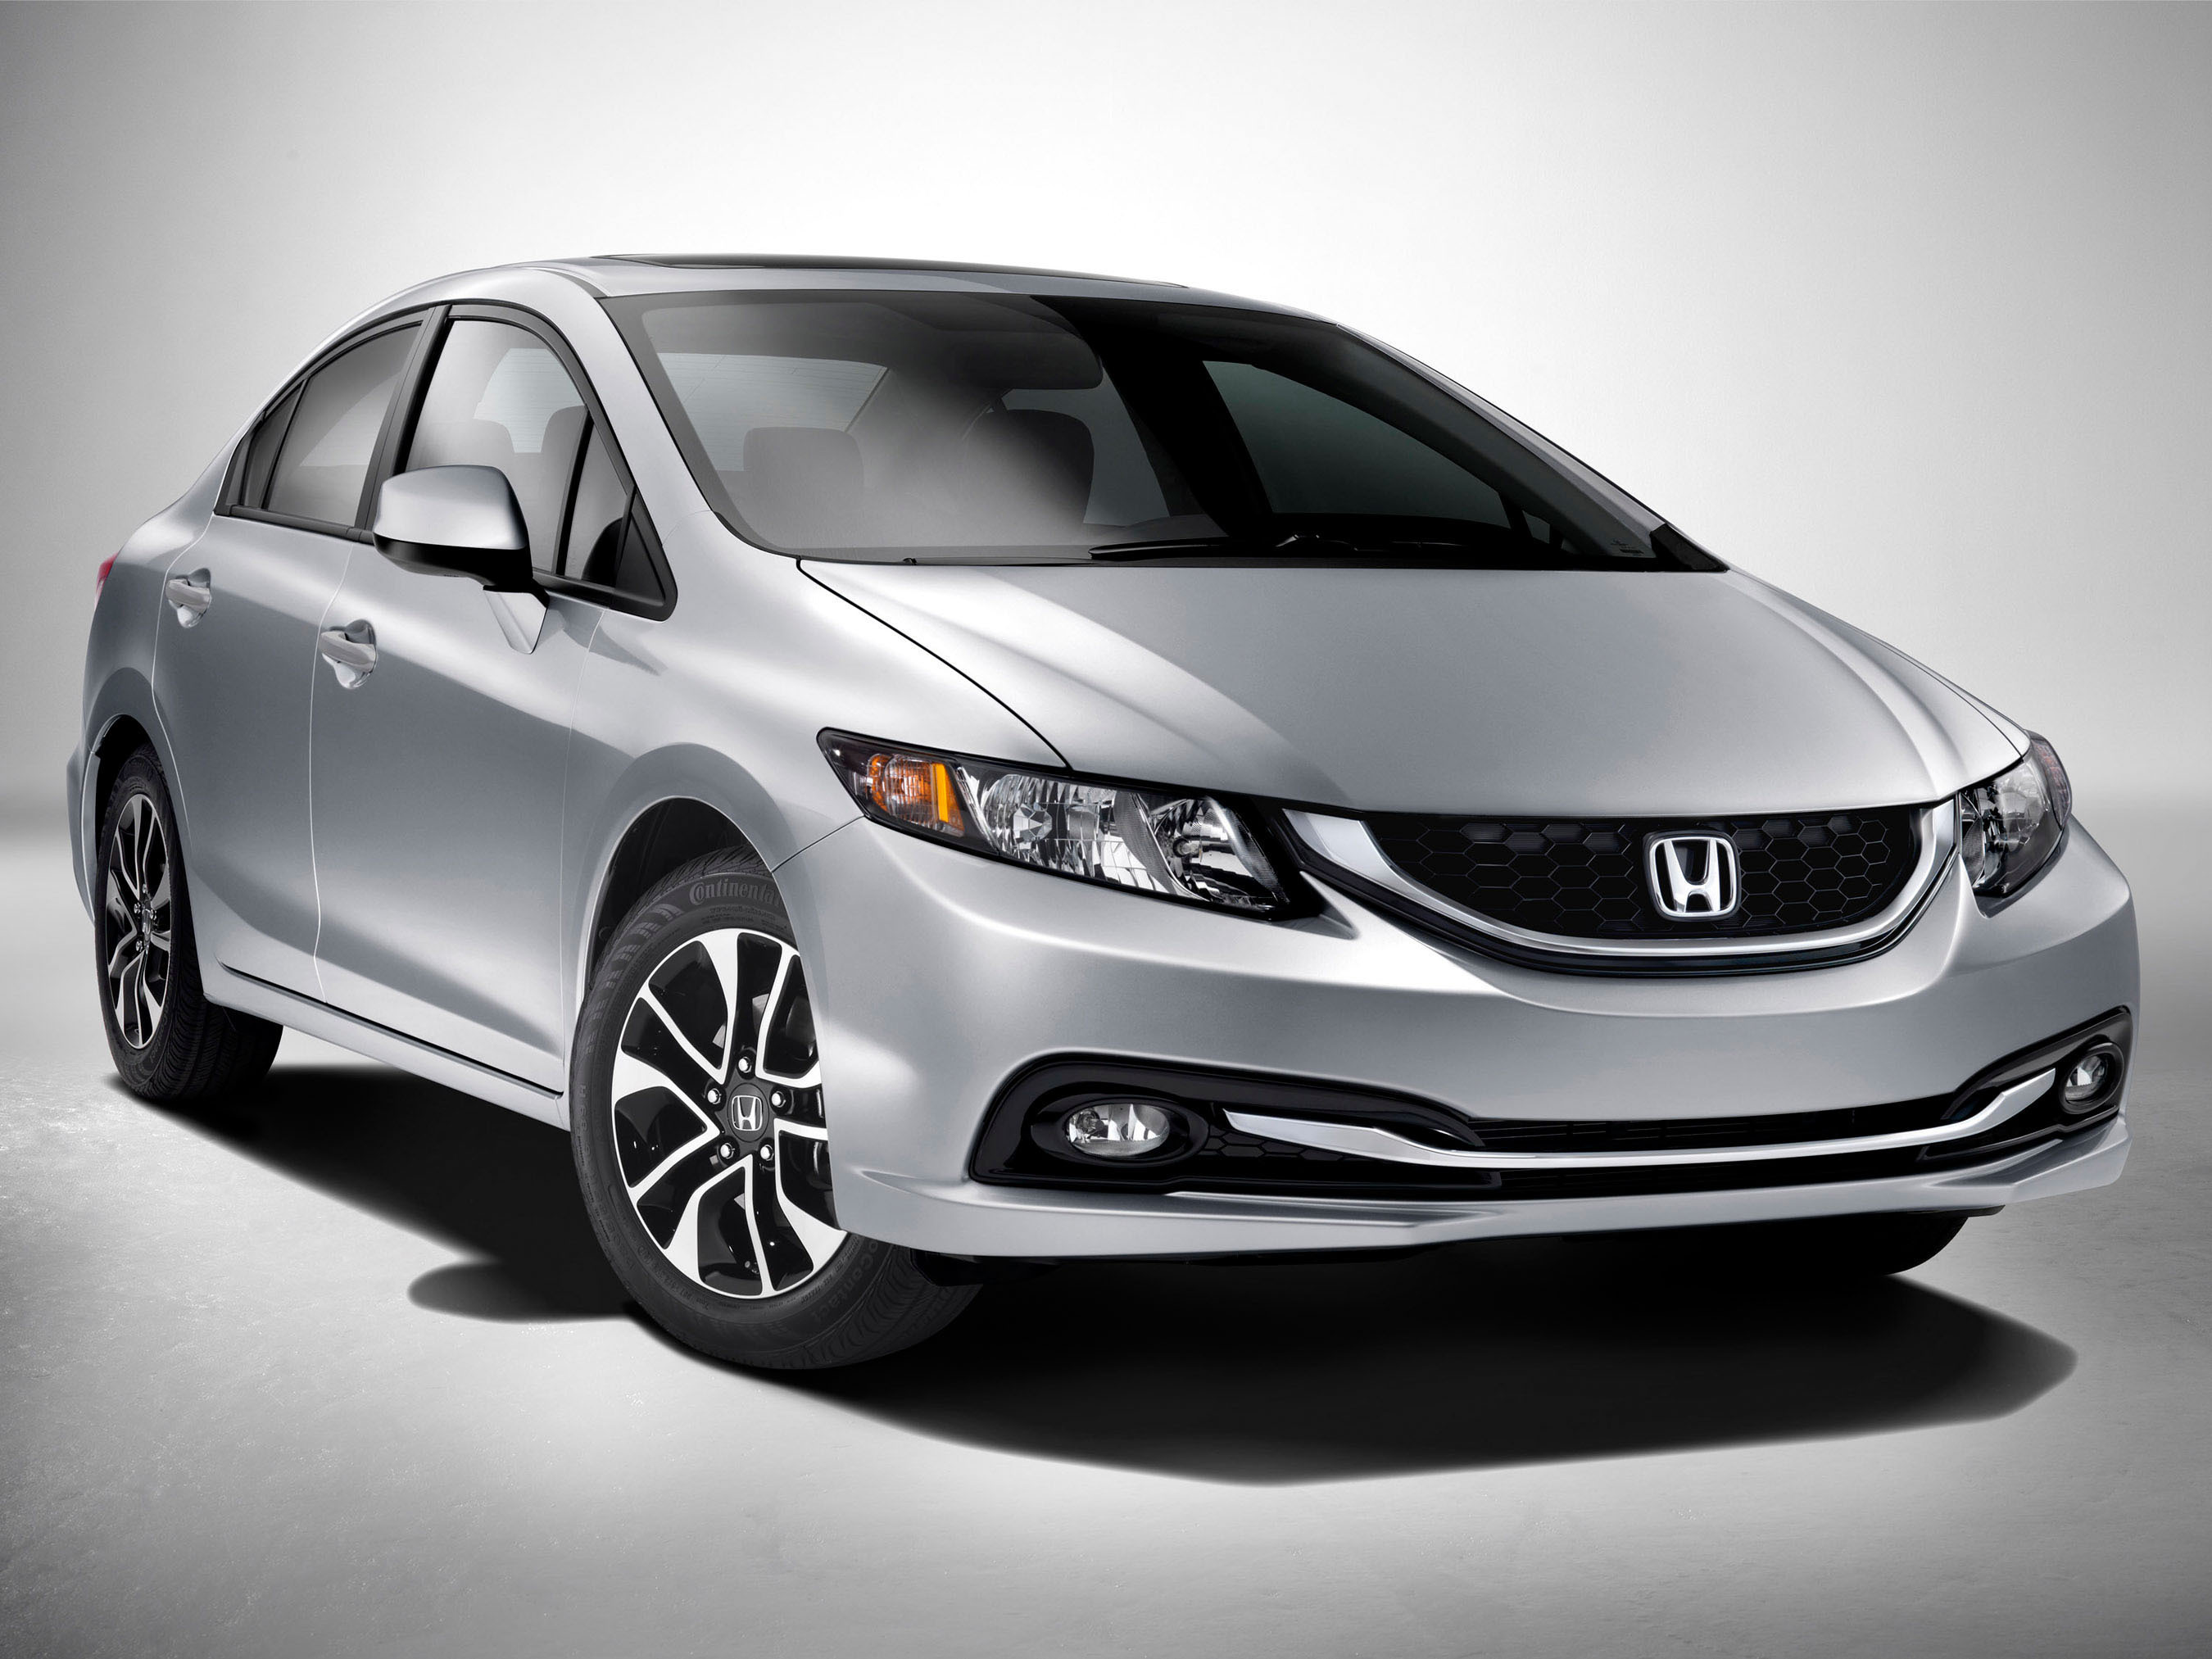 Restyled 2013 Honda Civic Arrives at U.S. Dealerships with Premium Style,  Host of Popular Standard Features